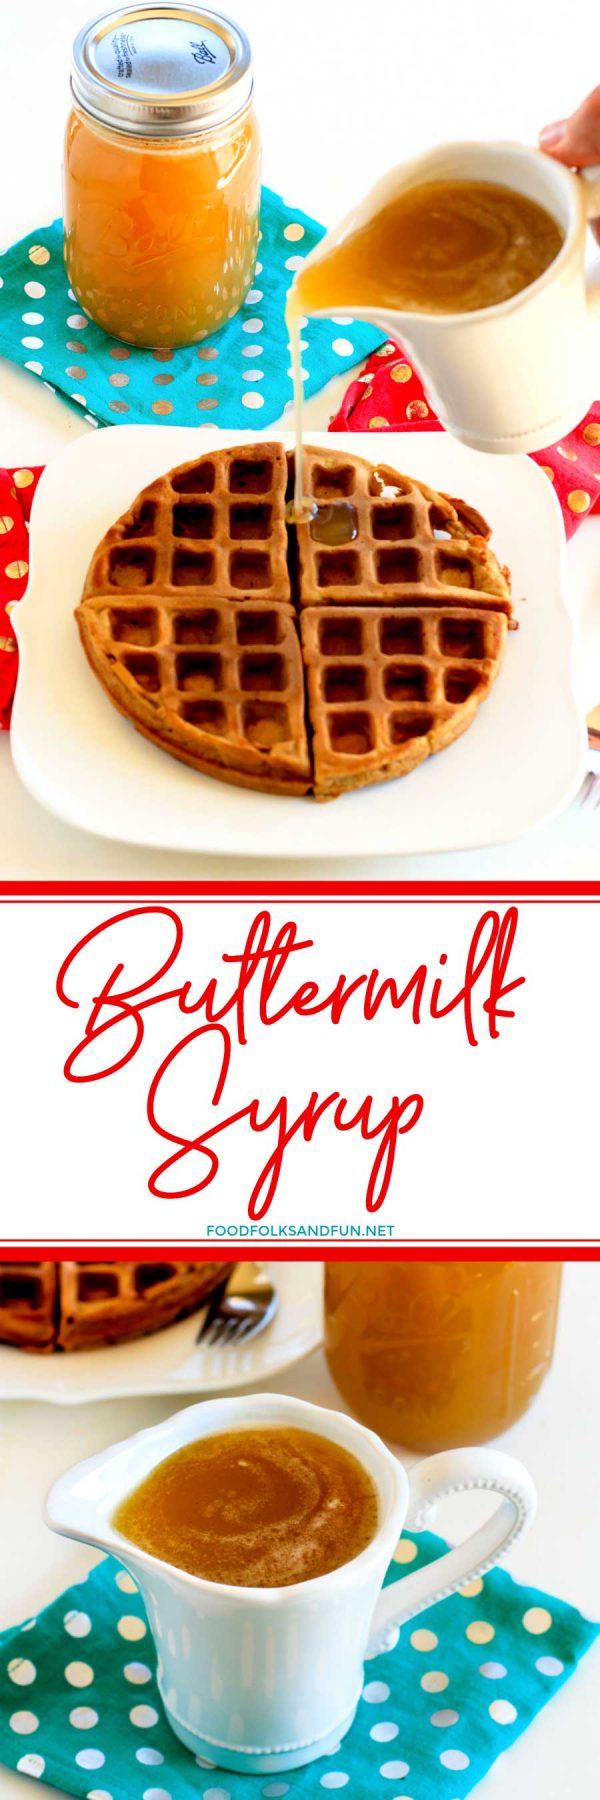 The easiest Homemade Buttermilk Syrup recipe!